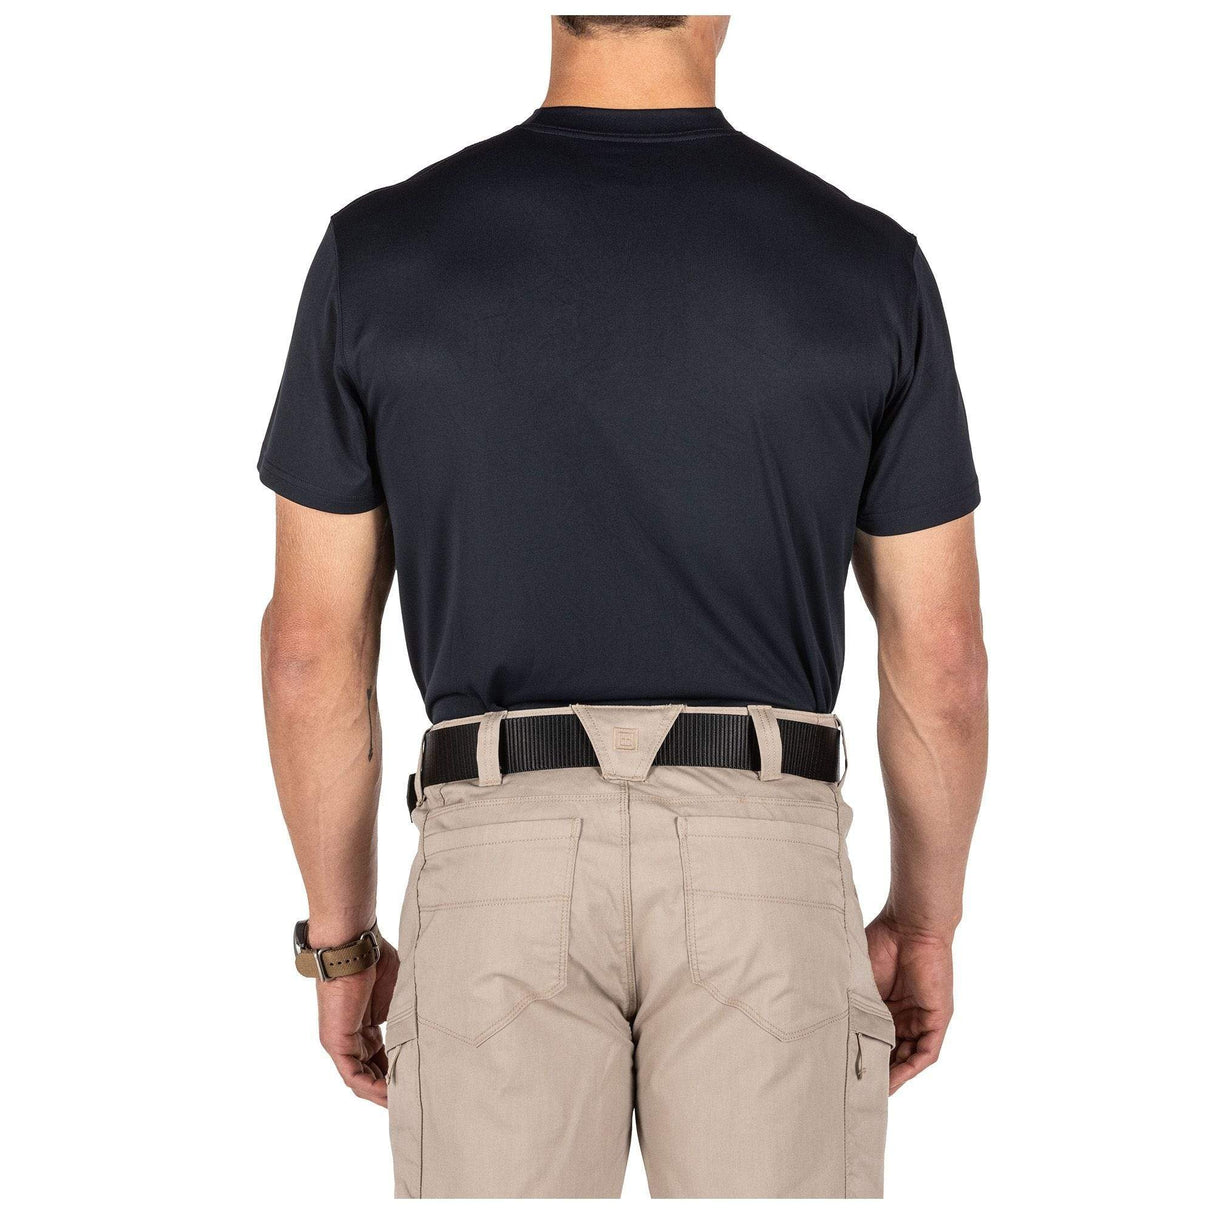 PERFORMANCE UTILI-T SHORT SLEEVE 2-PACK - 5.11 Tactical Finland